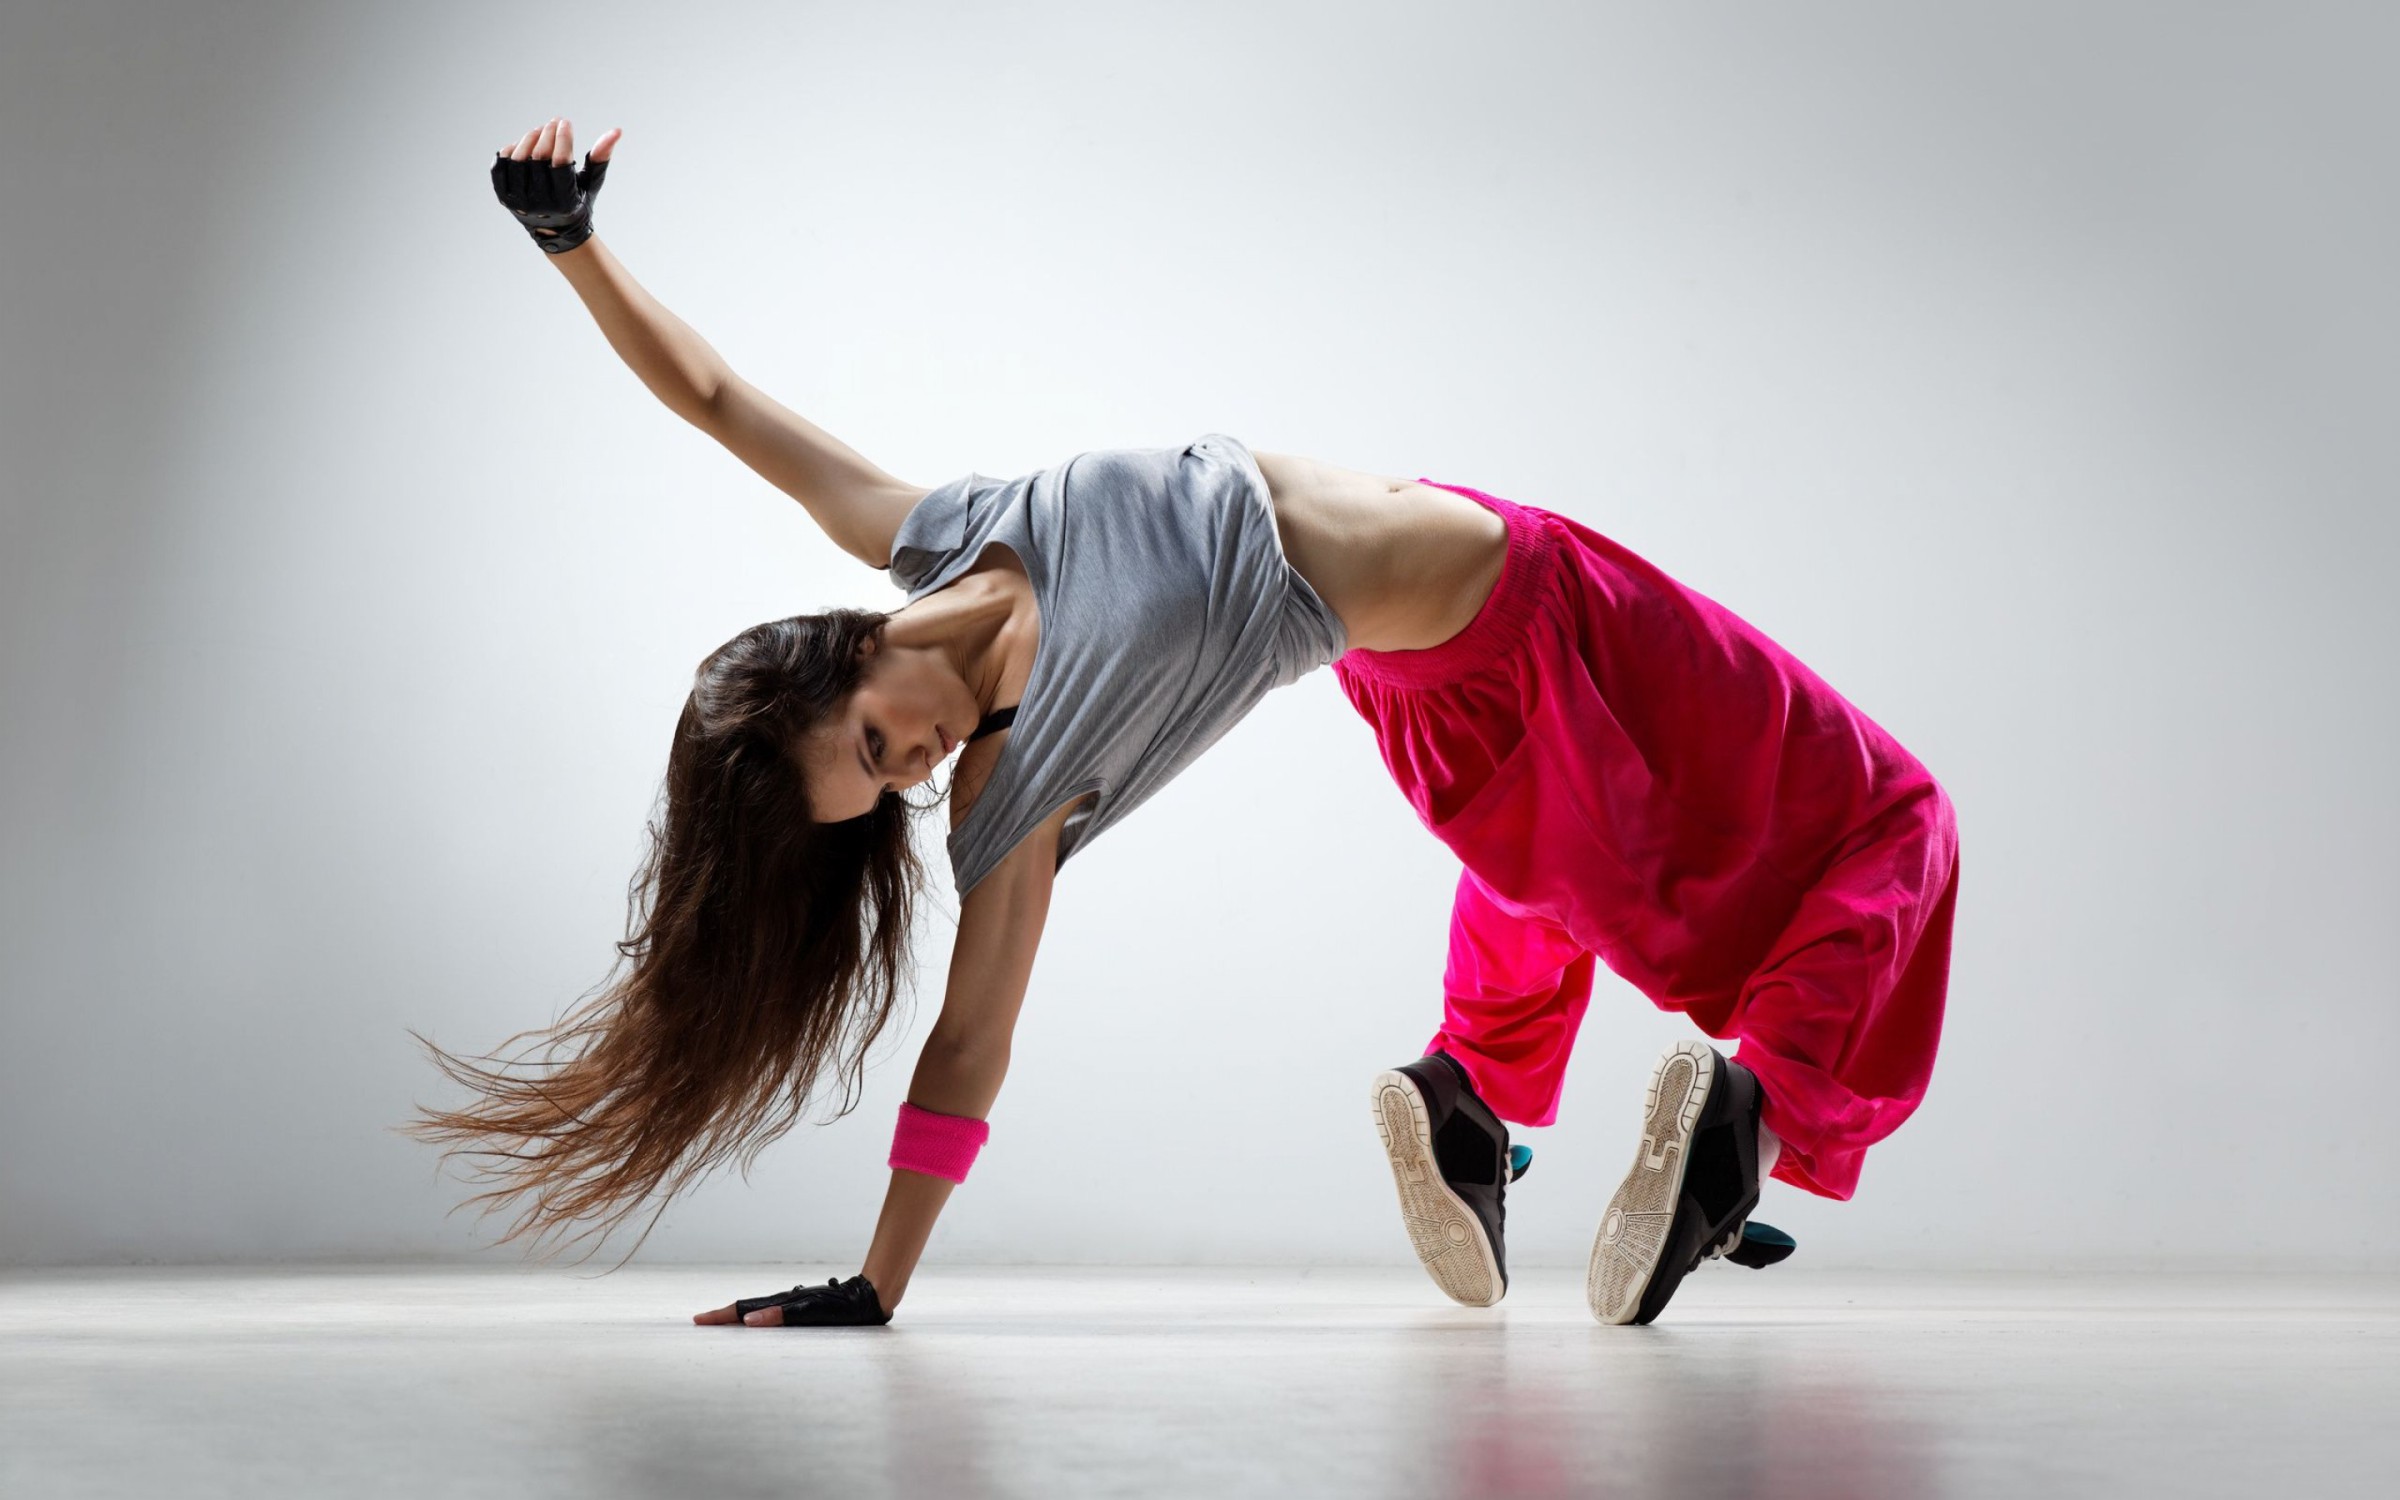 Hip Hop Dance By A Girl Free Awesome Image For Mobile